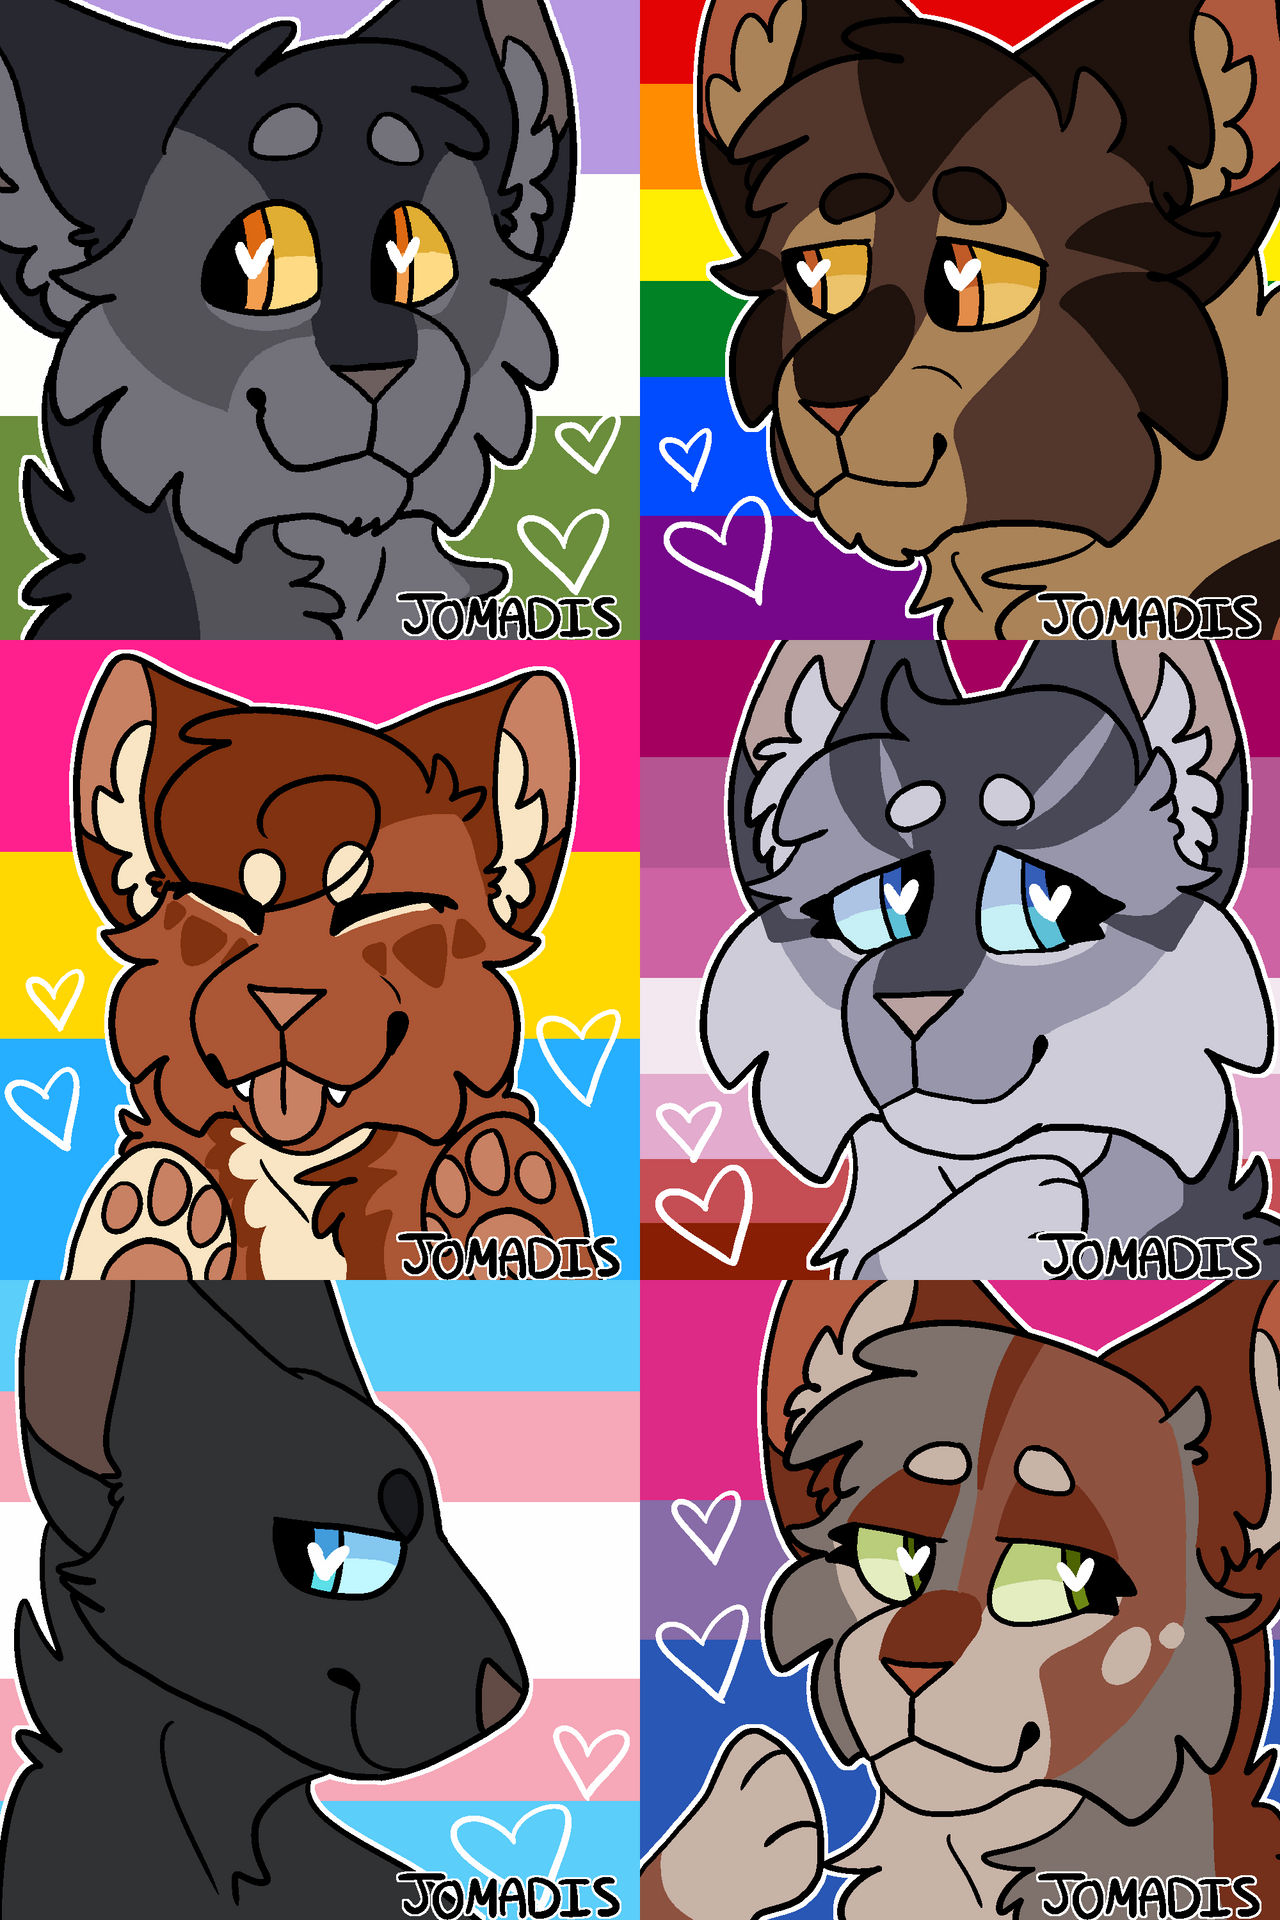 Day and Night Icons - warriorcats post - Imgur